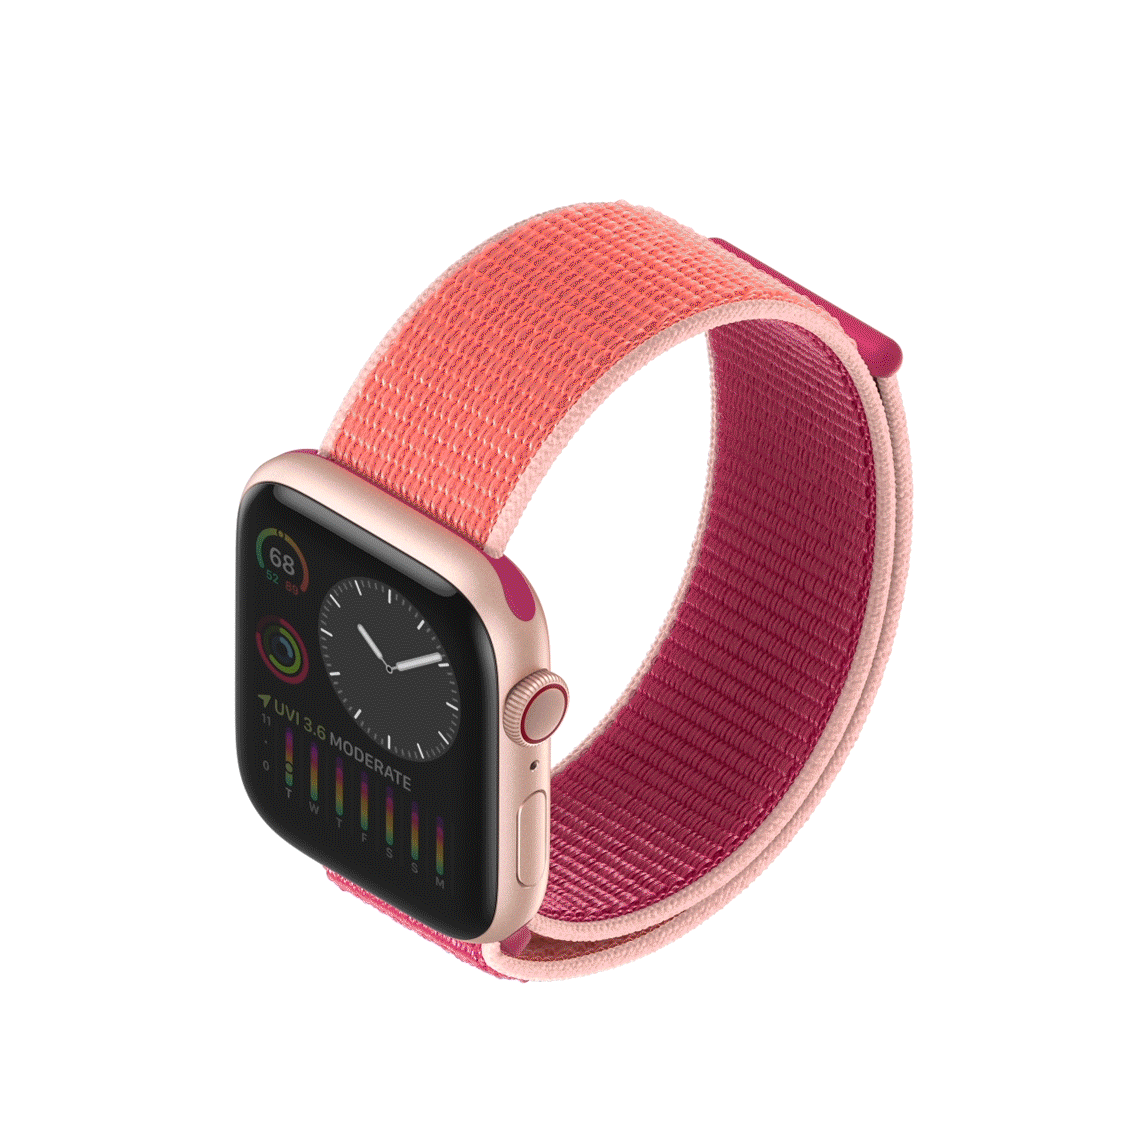 Apple Watch Series 5 comes with Always-On Retina Display, among other things 25